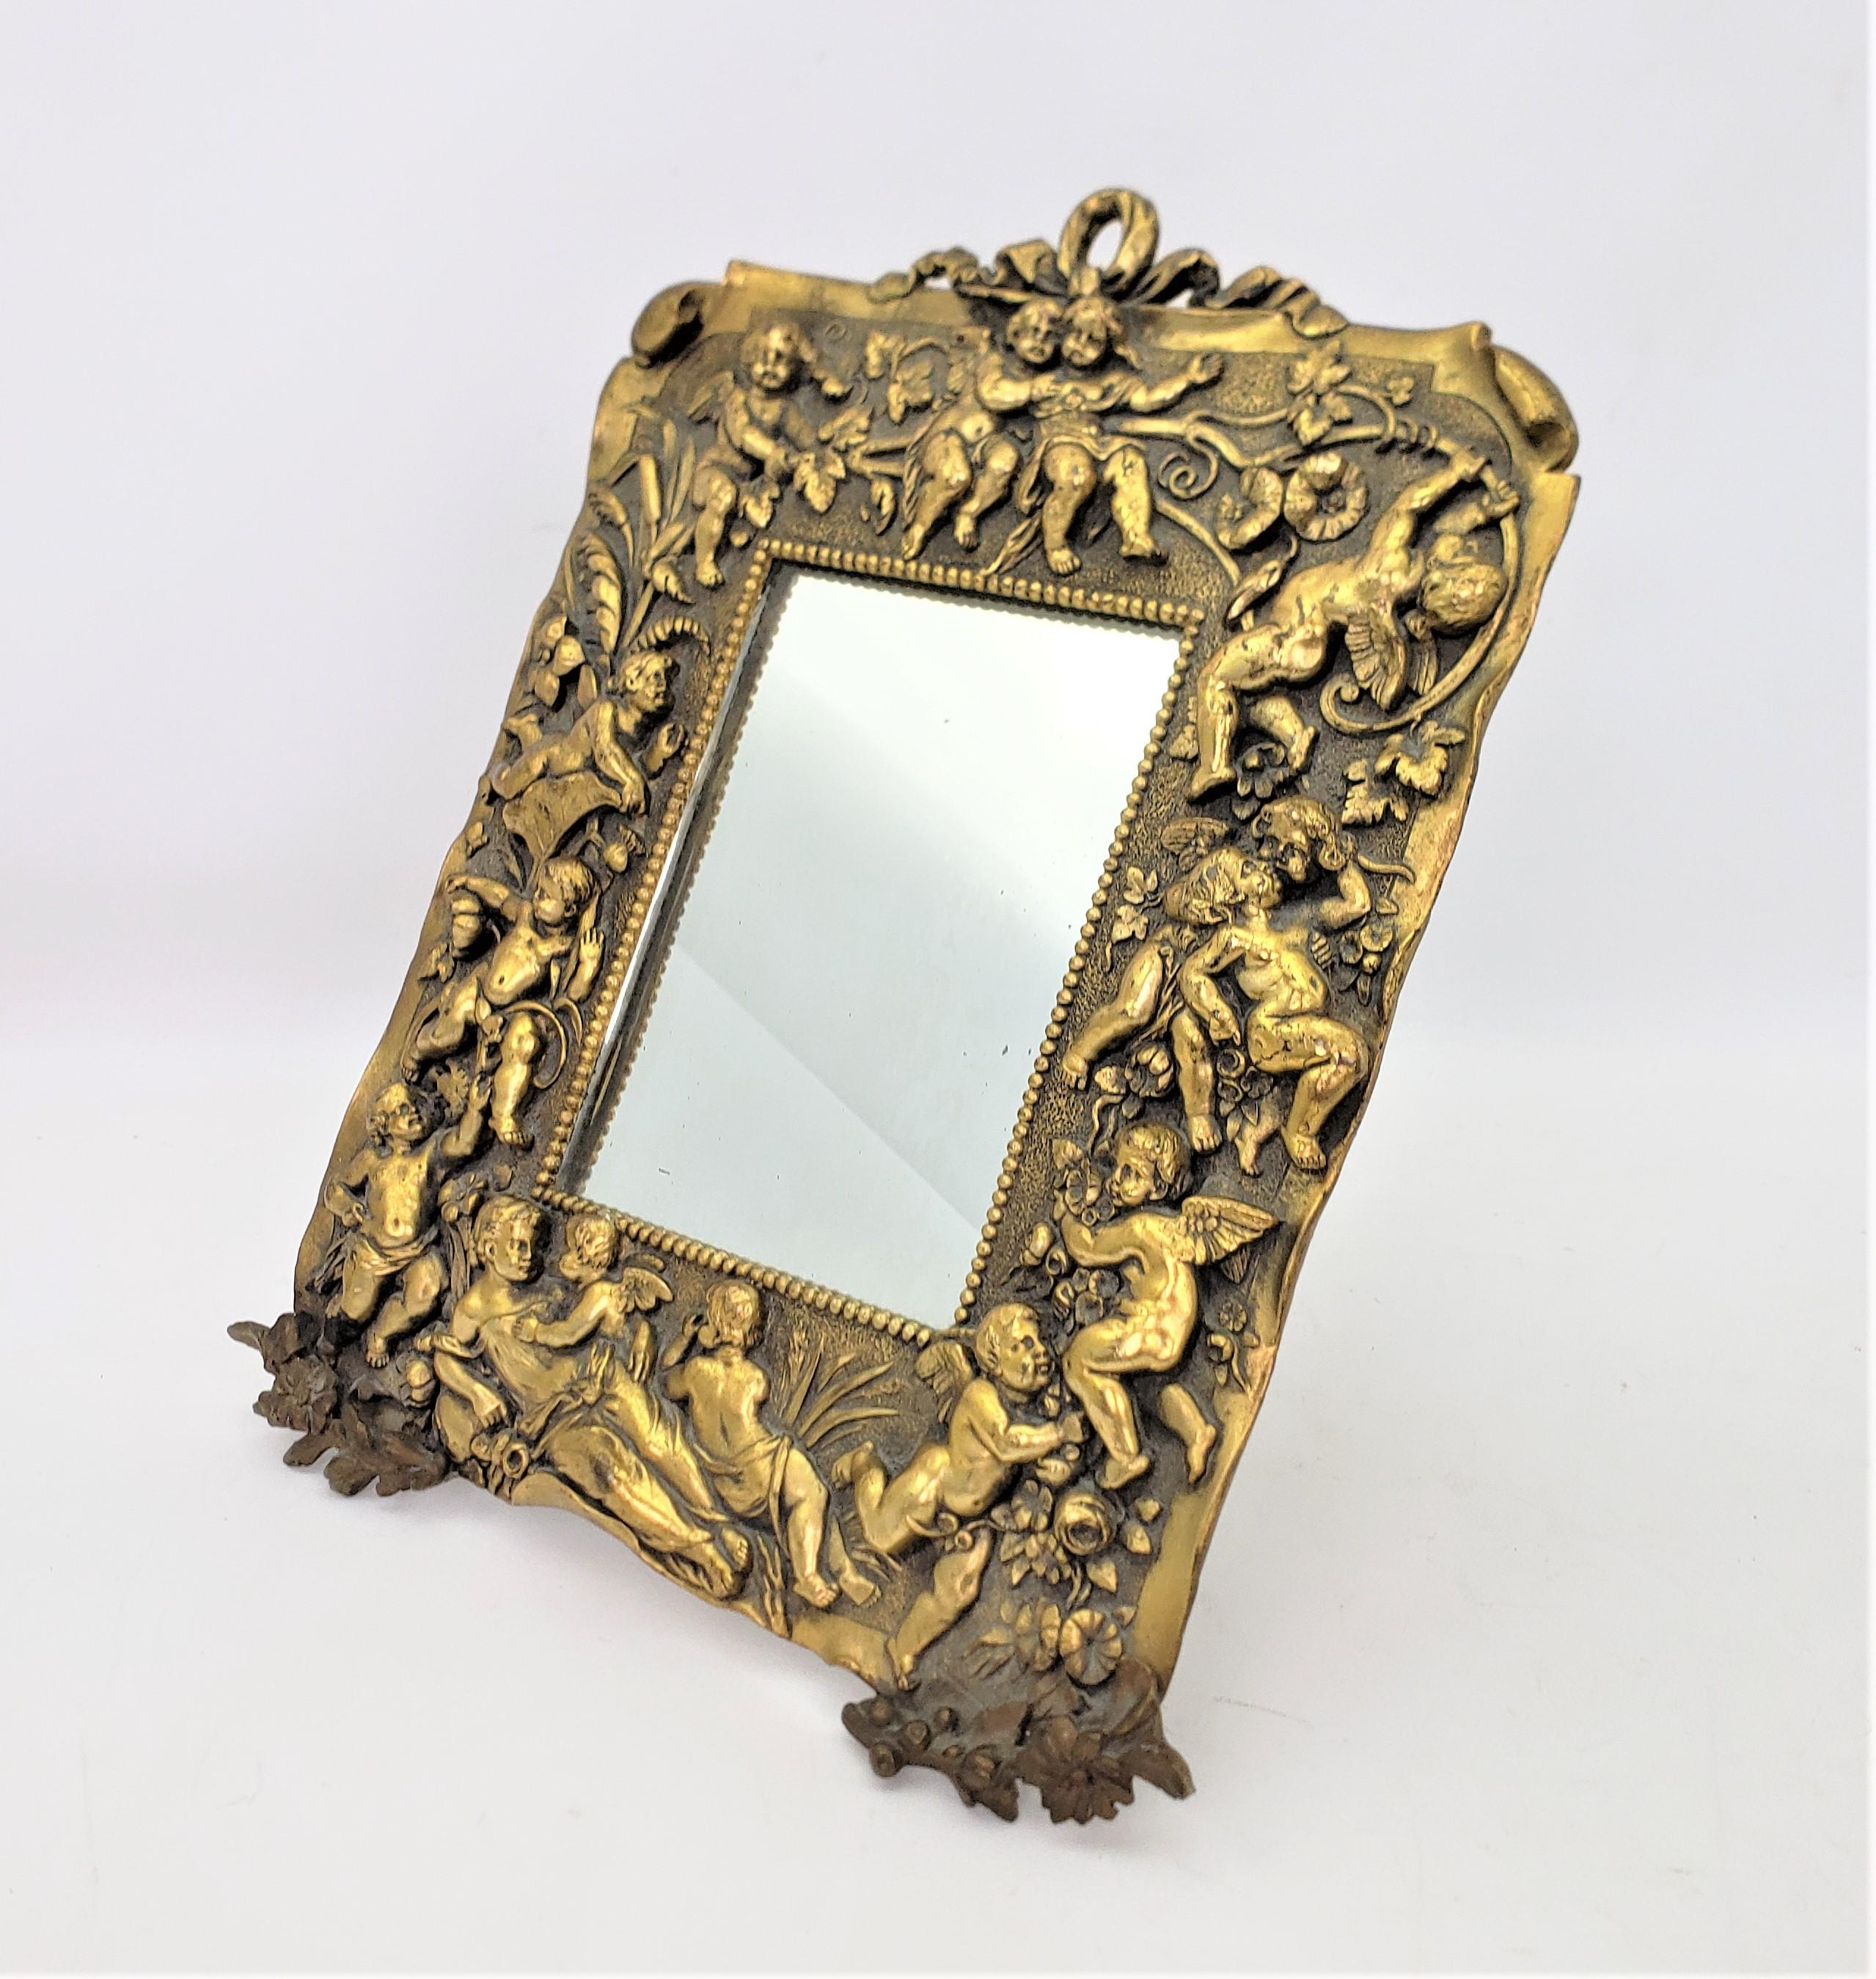 This antique cast picture frame or table mirror is unsigned, but presumed to have originated from France and dating to approximately 1900 and done in a Renaisance Revival style. The frame is composed of cast patinated bronze with a series of male